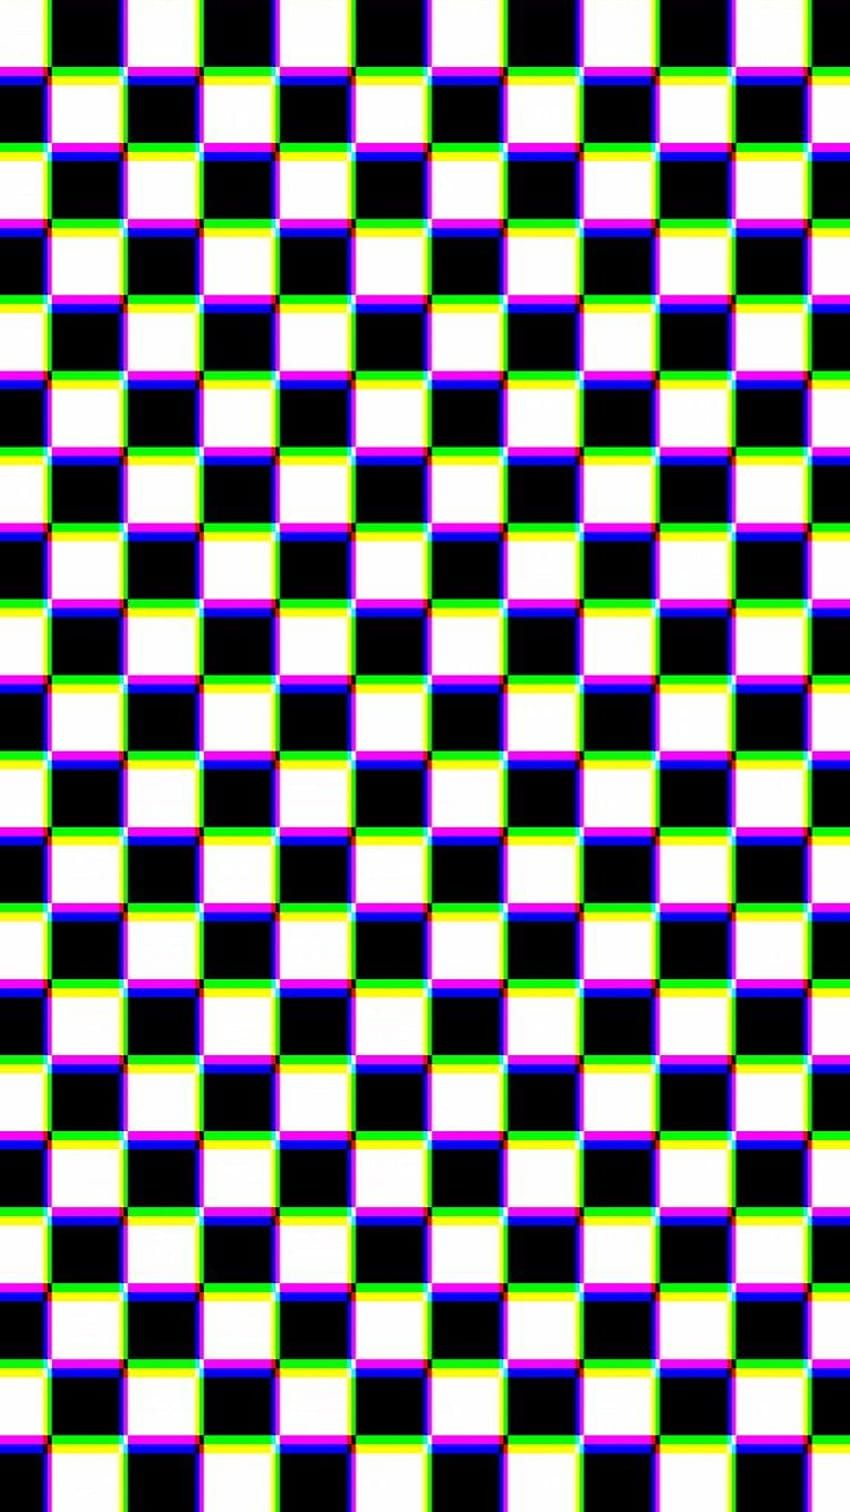 A black and white checkered pattern with green squares - Checkered, 3D, glitch